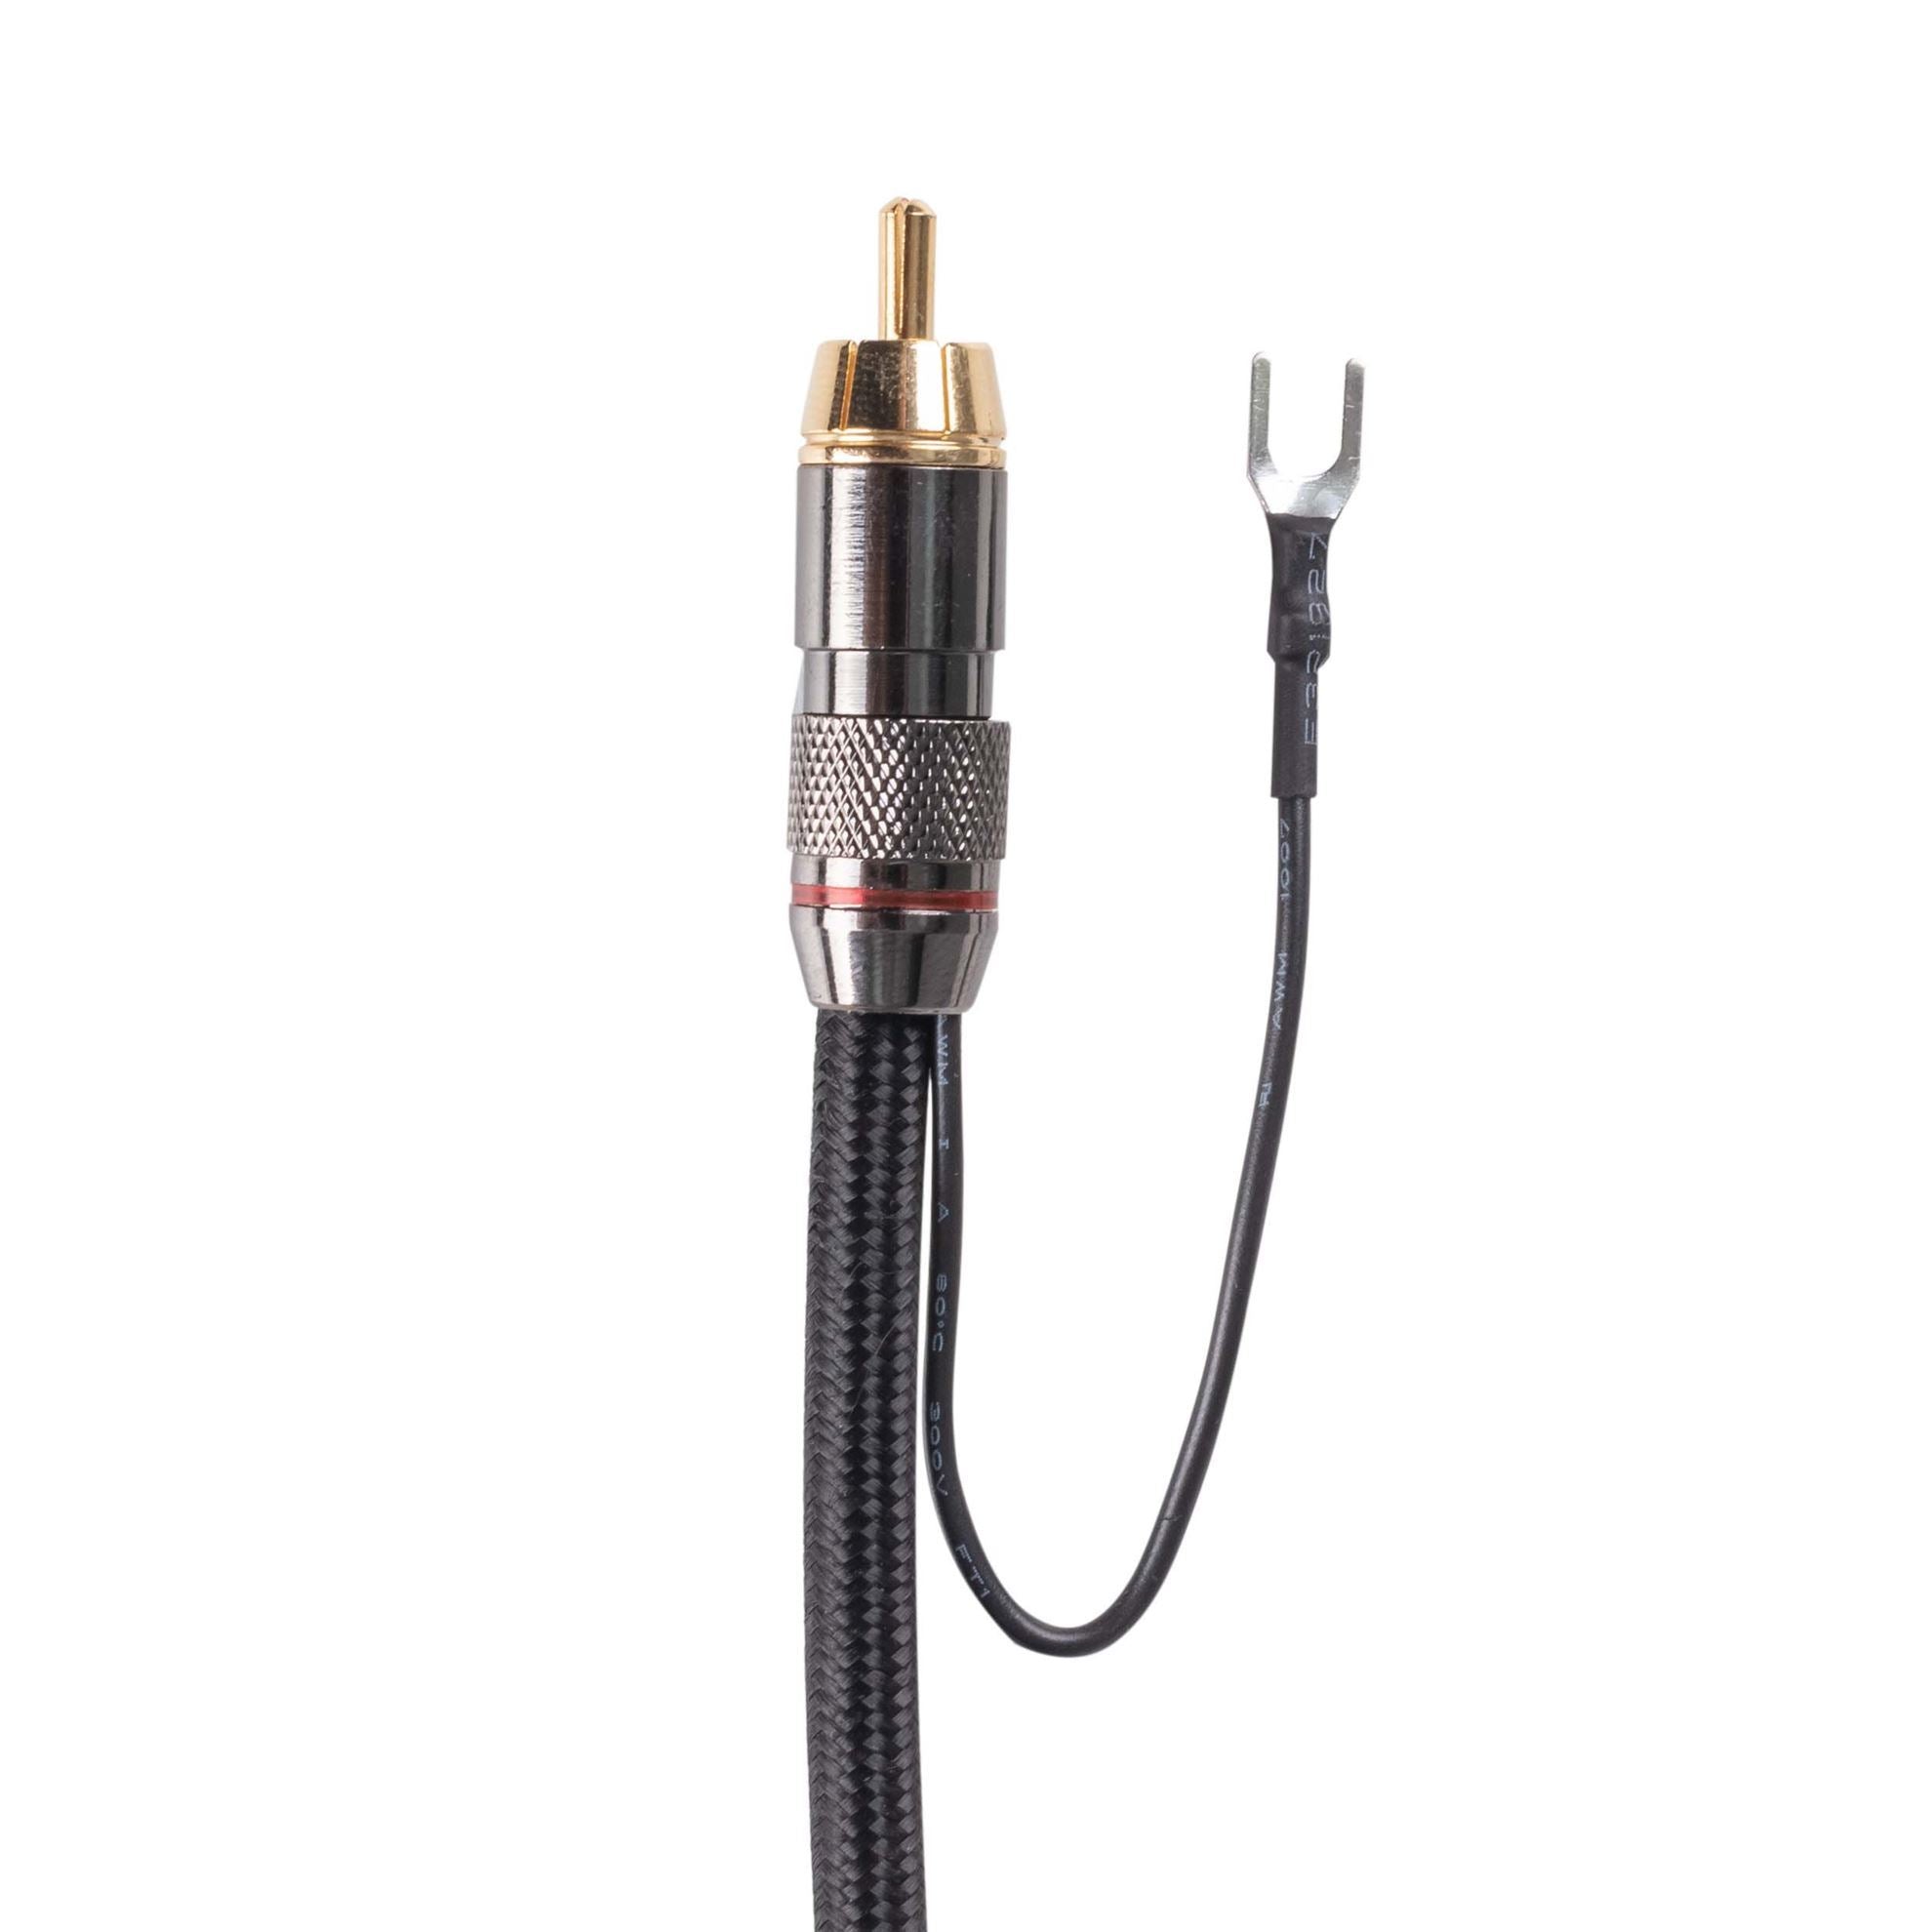 DYNAMIX_6m_Coaxial_Subwoofer_Cable_RCA_Male_to_Male_with_Grounding_Spade_Connectors 513